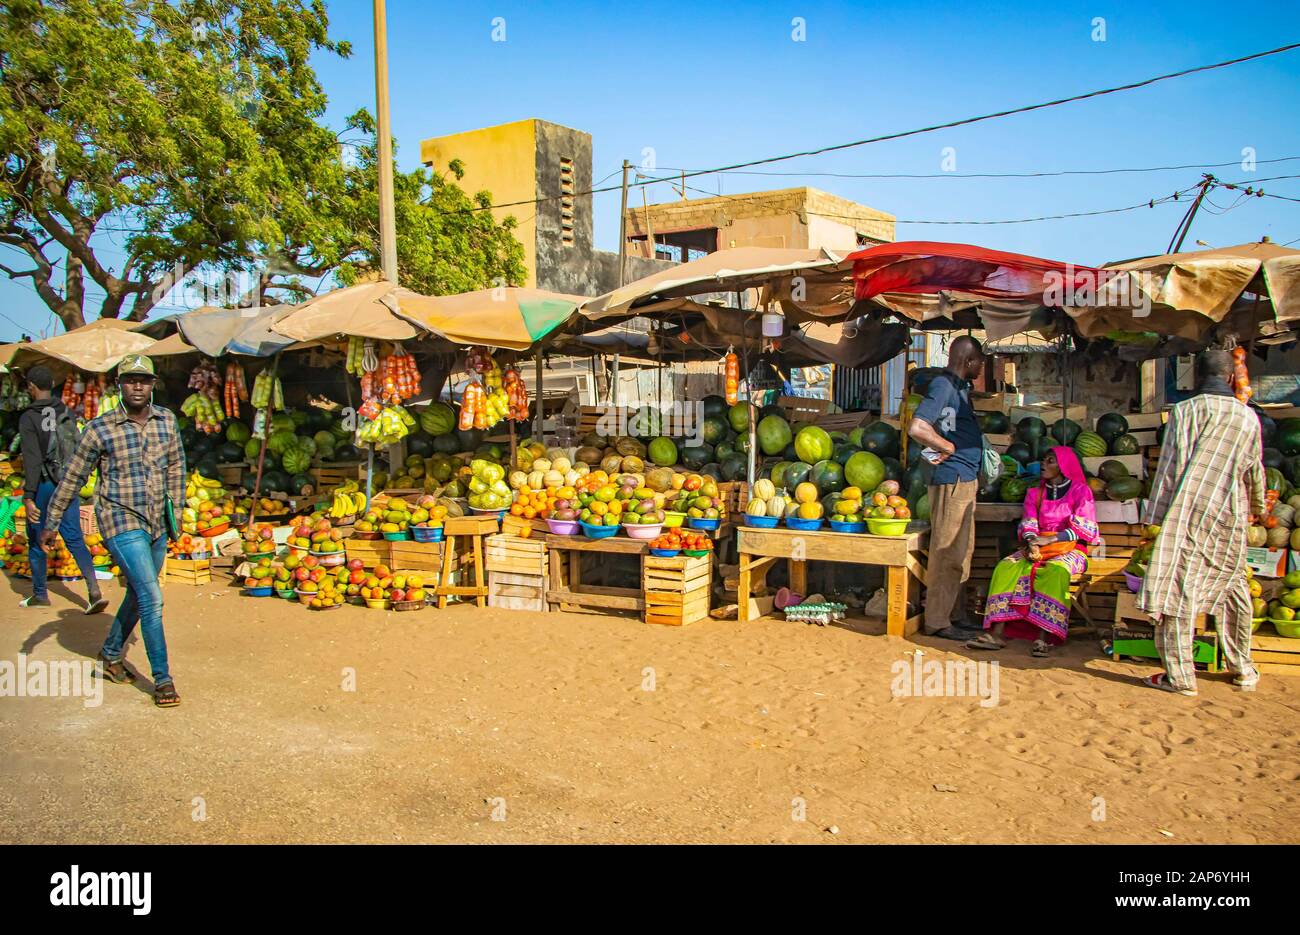 MBour, Senegal, AFRICA - April 22, 2019: Street fruit market where locals sell tropical fruits like melons, mangoes, oranges, lemons and more. I Stock Photo